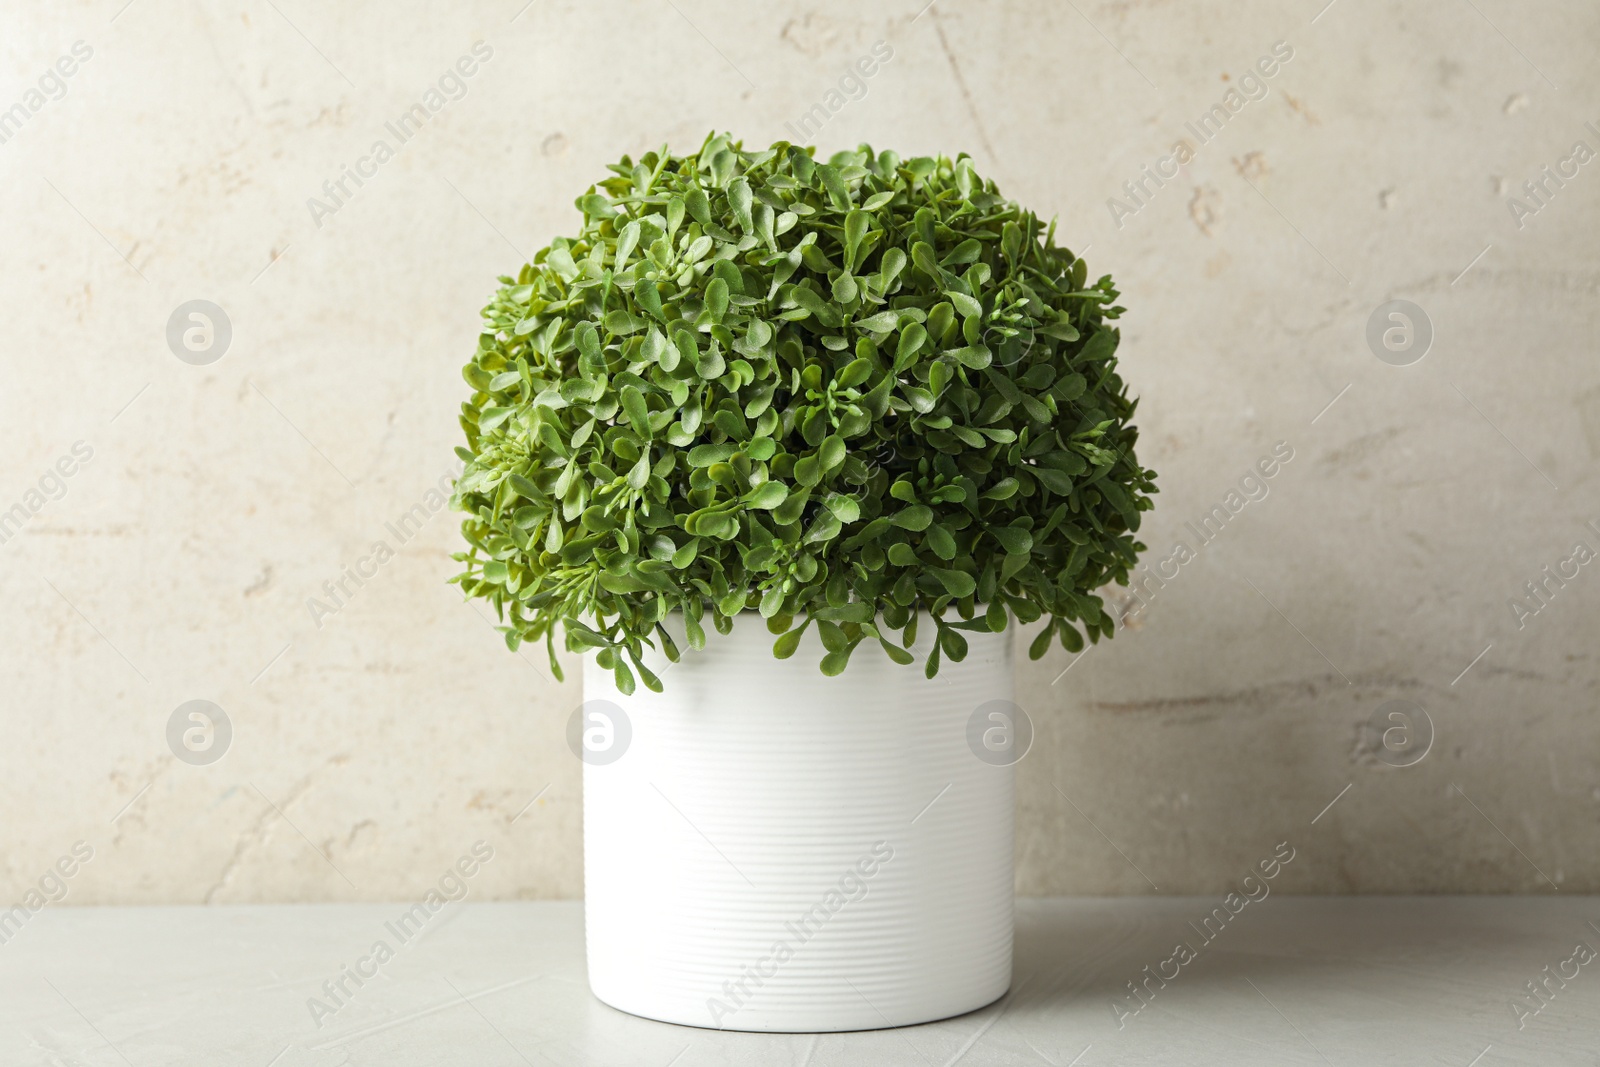 Photo of Artificial plant in white flower pot on table against light background